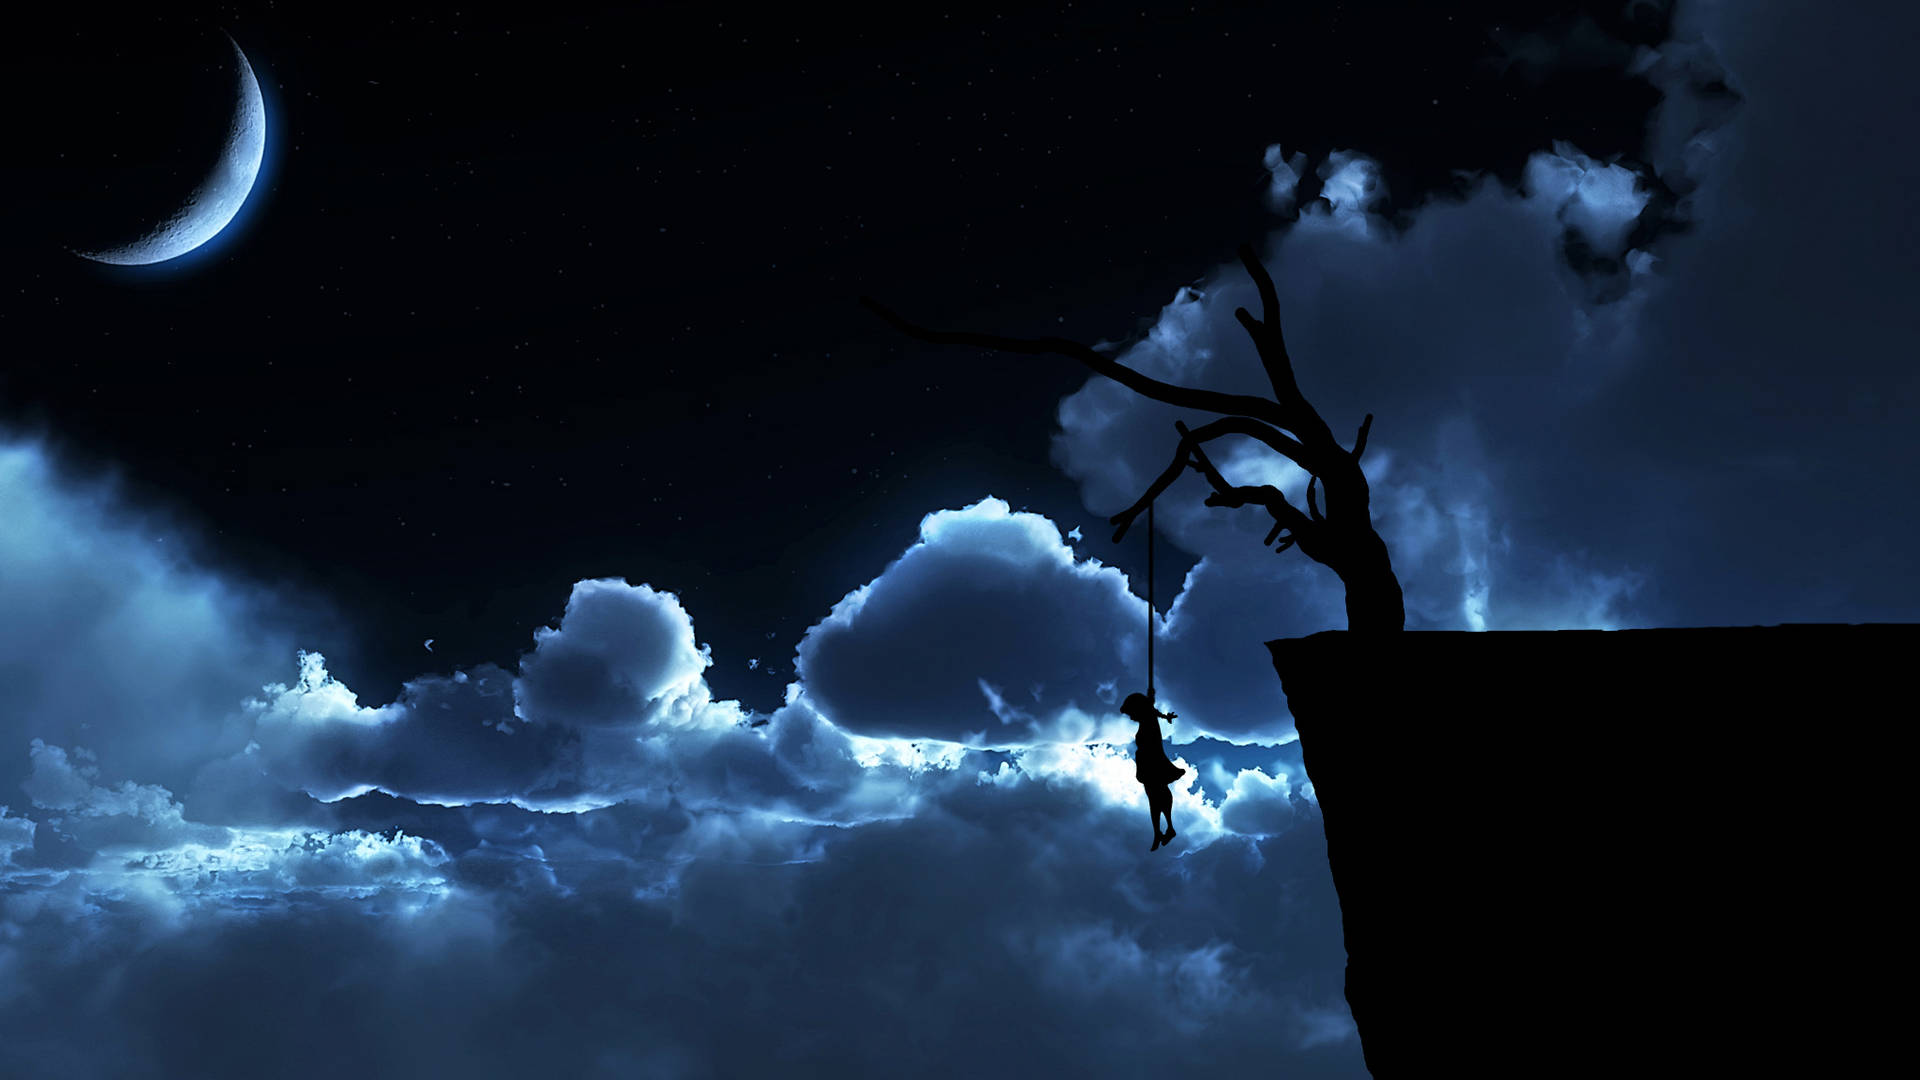 Look up to an empty night sky Wallpaper